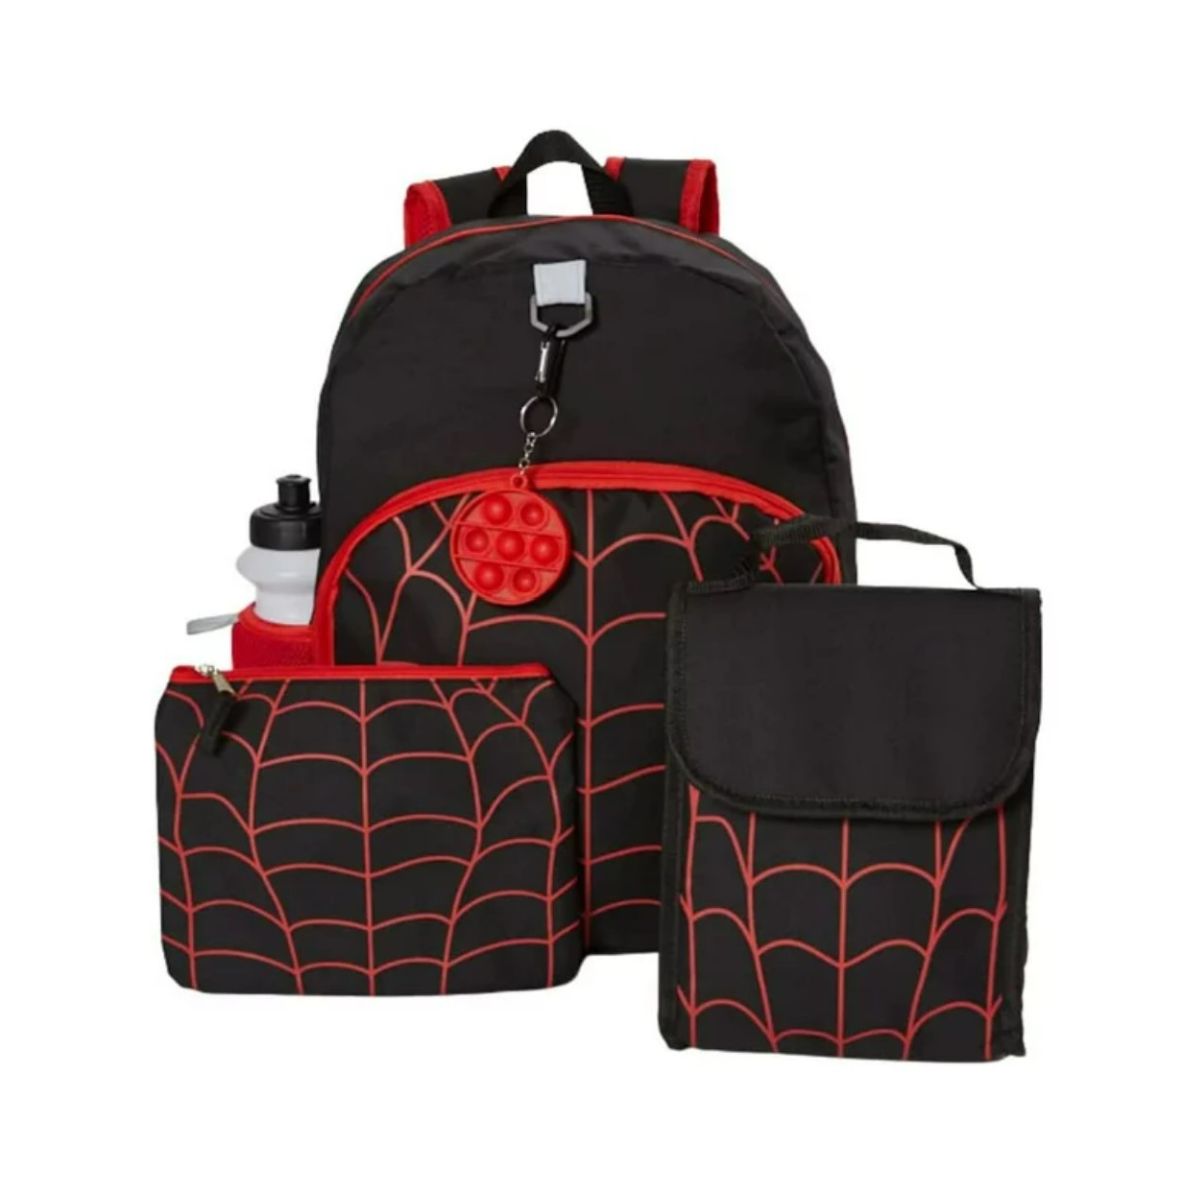 Black spiderman backpack, lunch box and pencil pouch with red features.